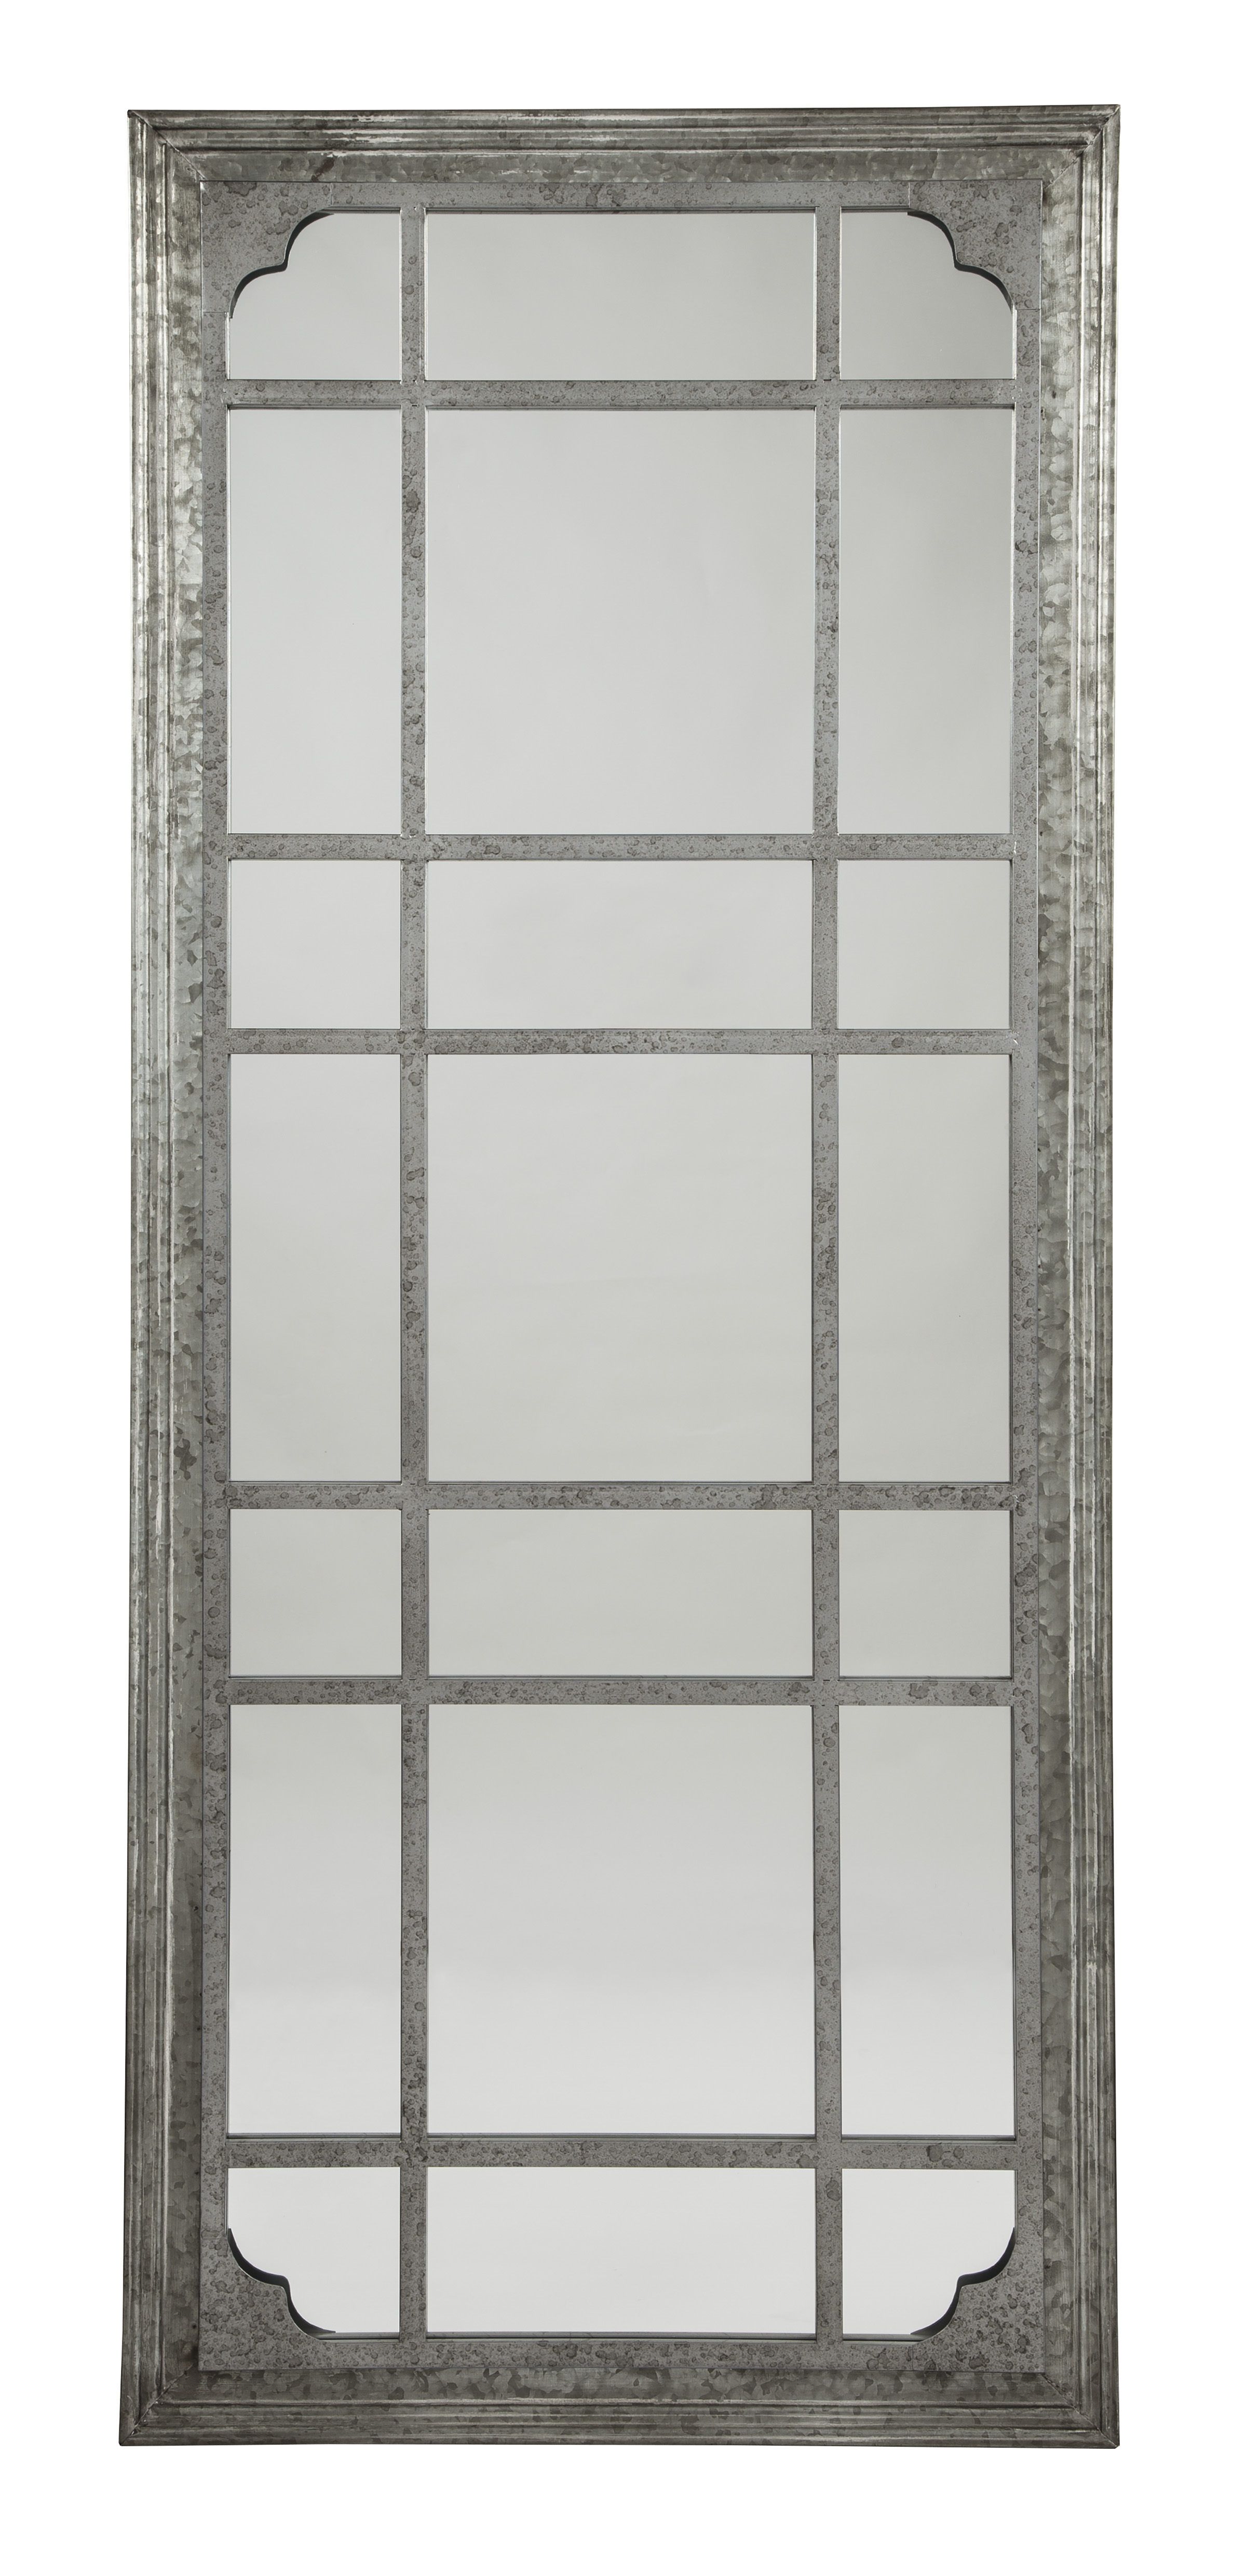 Ashley Furniture Remy Antique Gray Accent Mirror With Rectangle Antique Galvanized Metal Accent Mirrors (View 9 of 20)